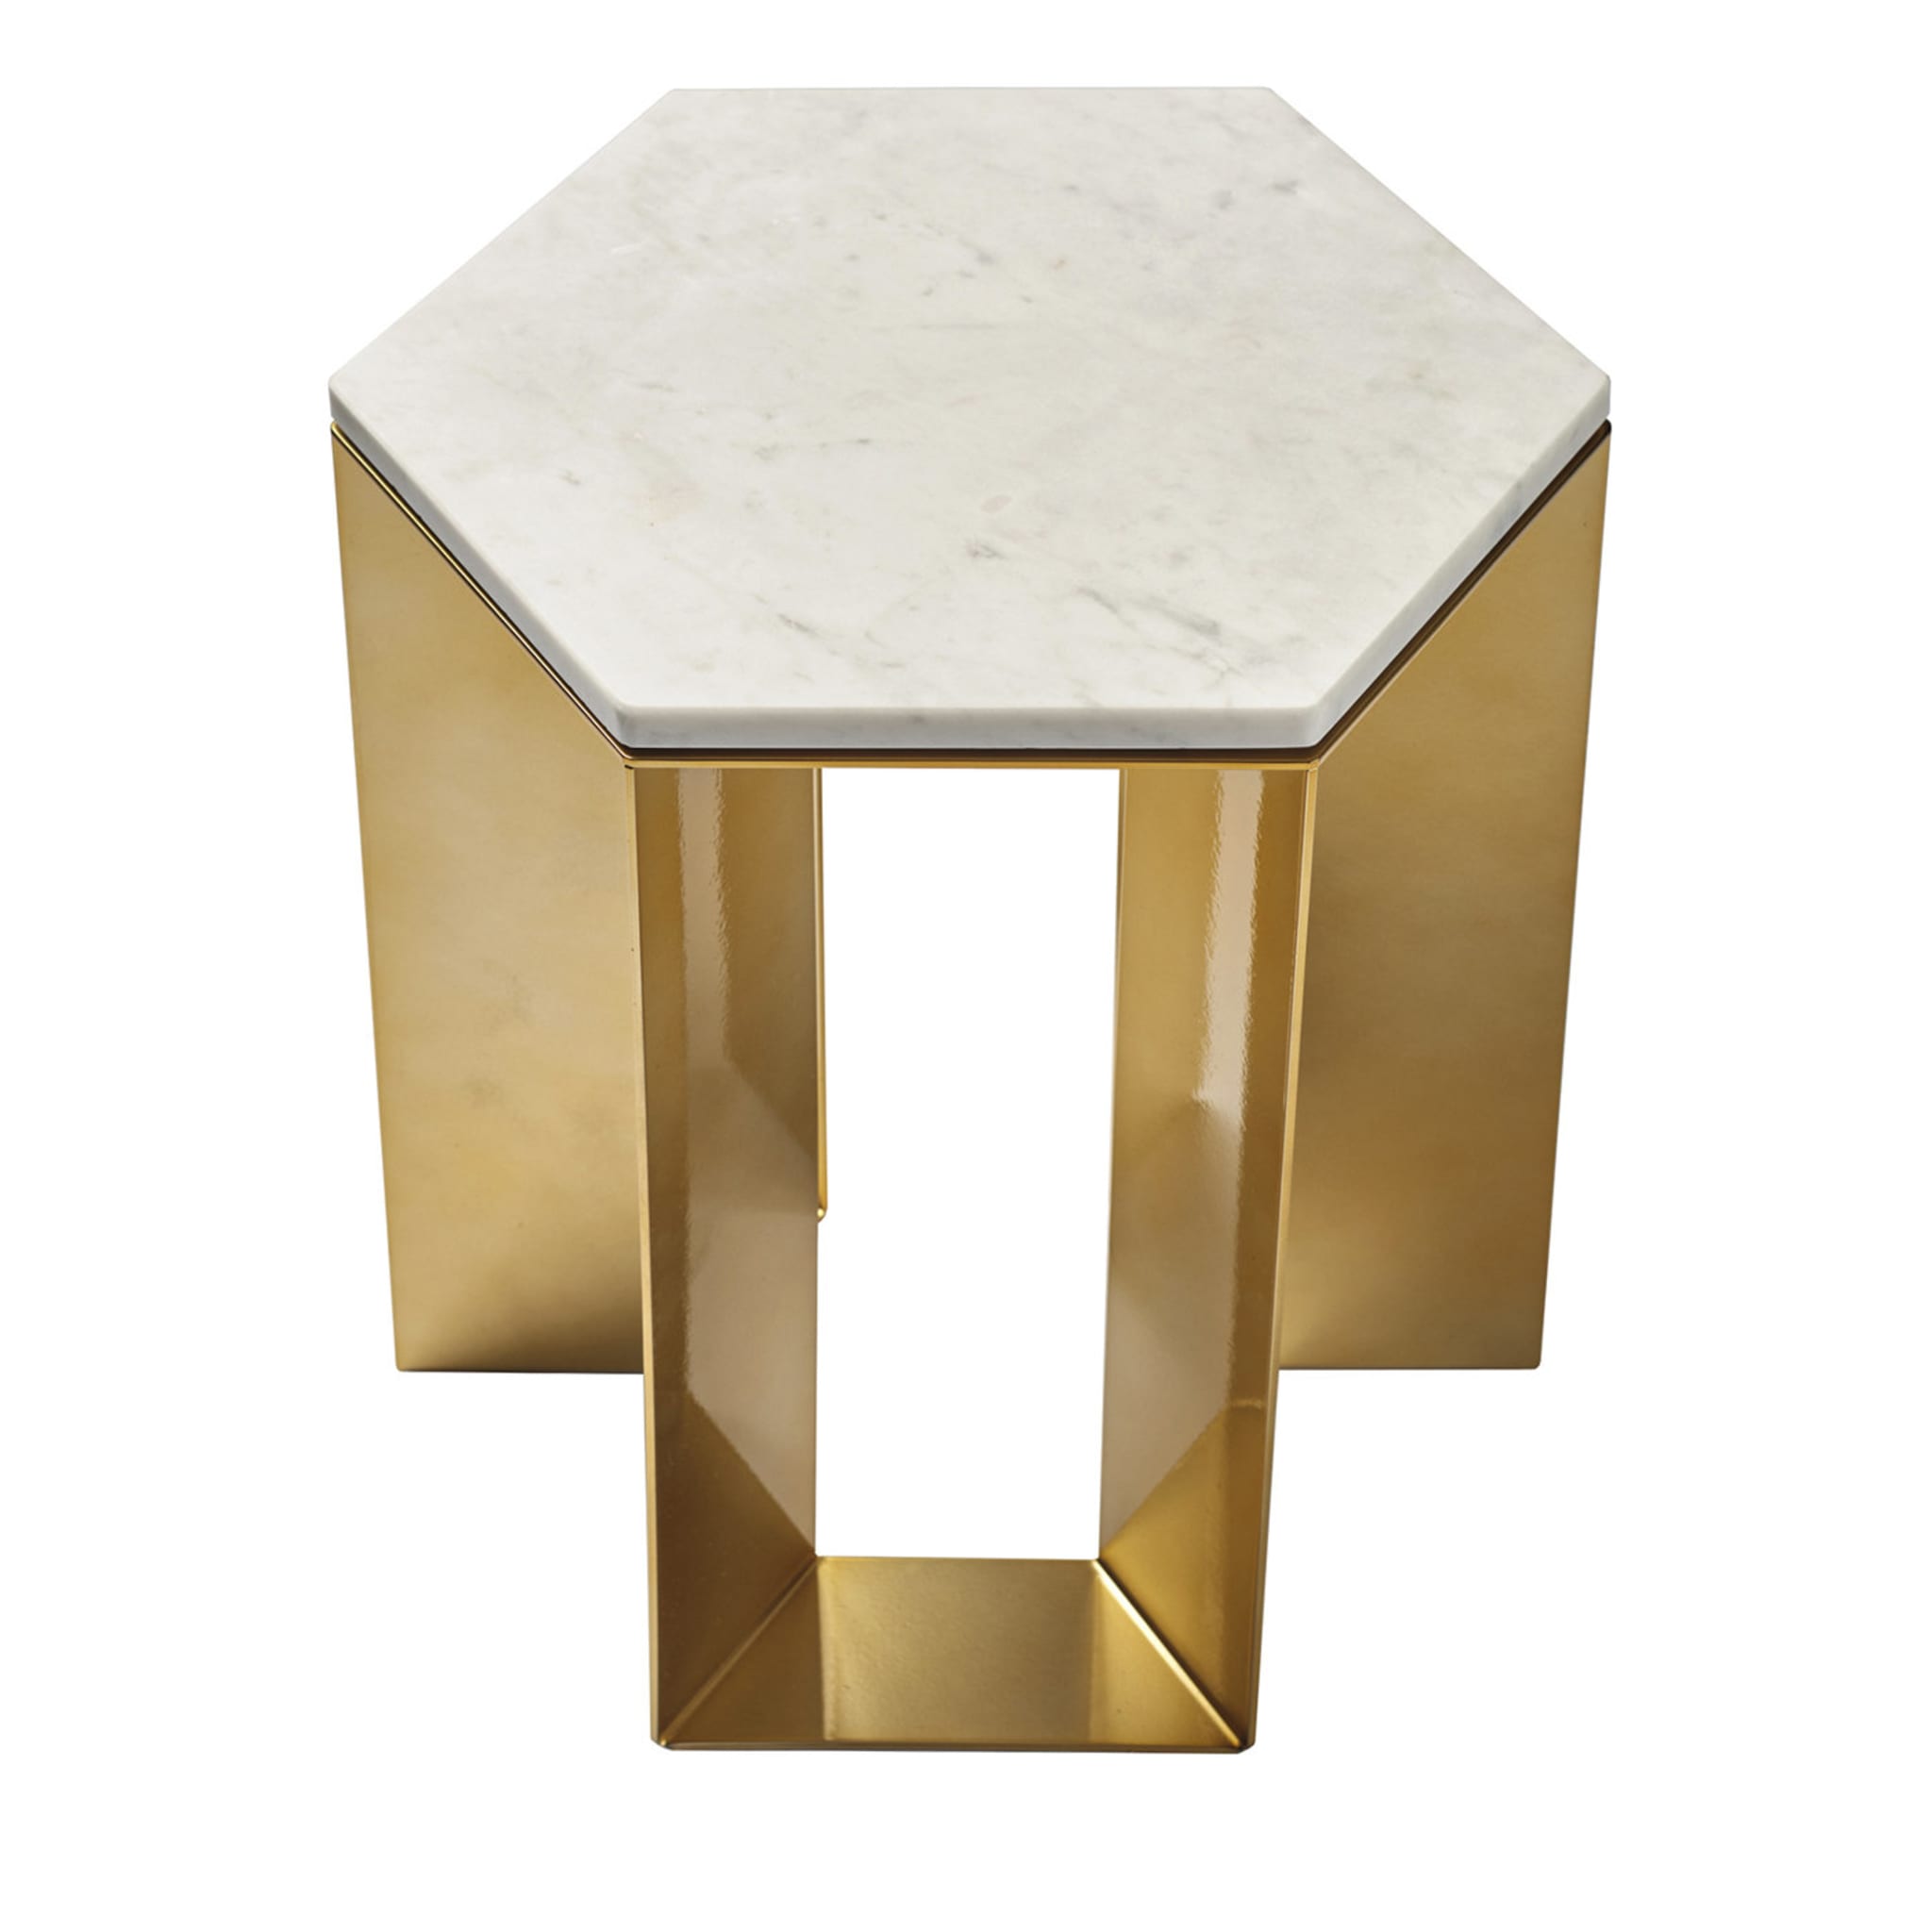 Alato Gold and White Marble Side Table by Antonio Saporito - Main view